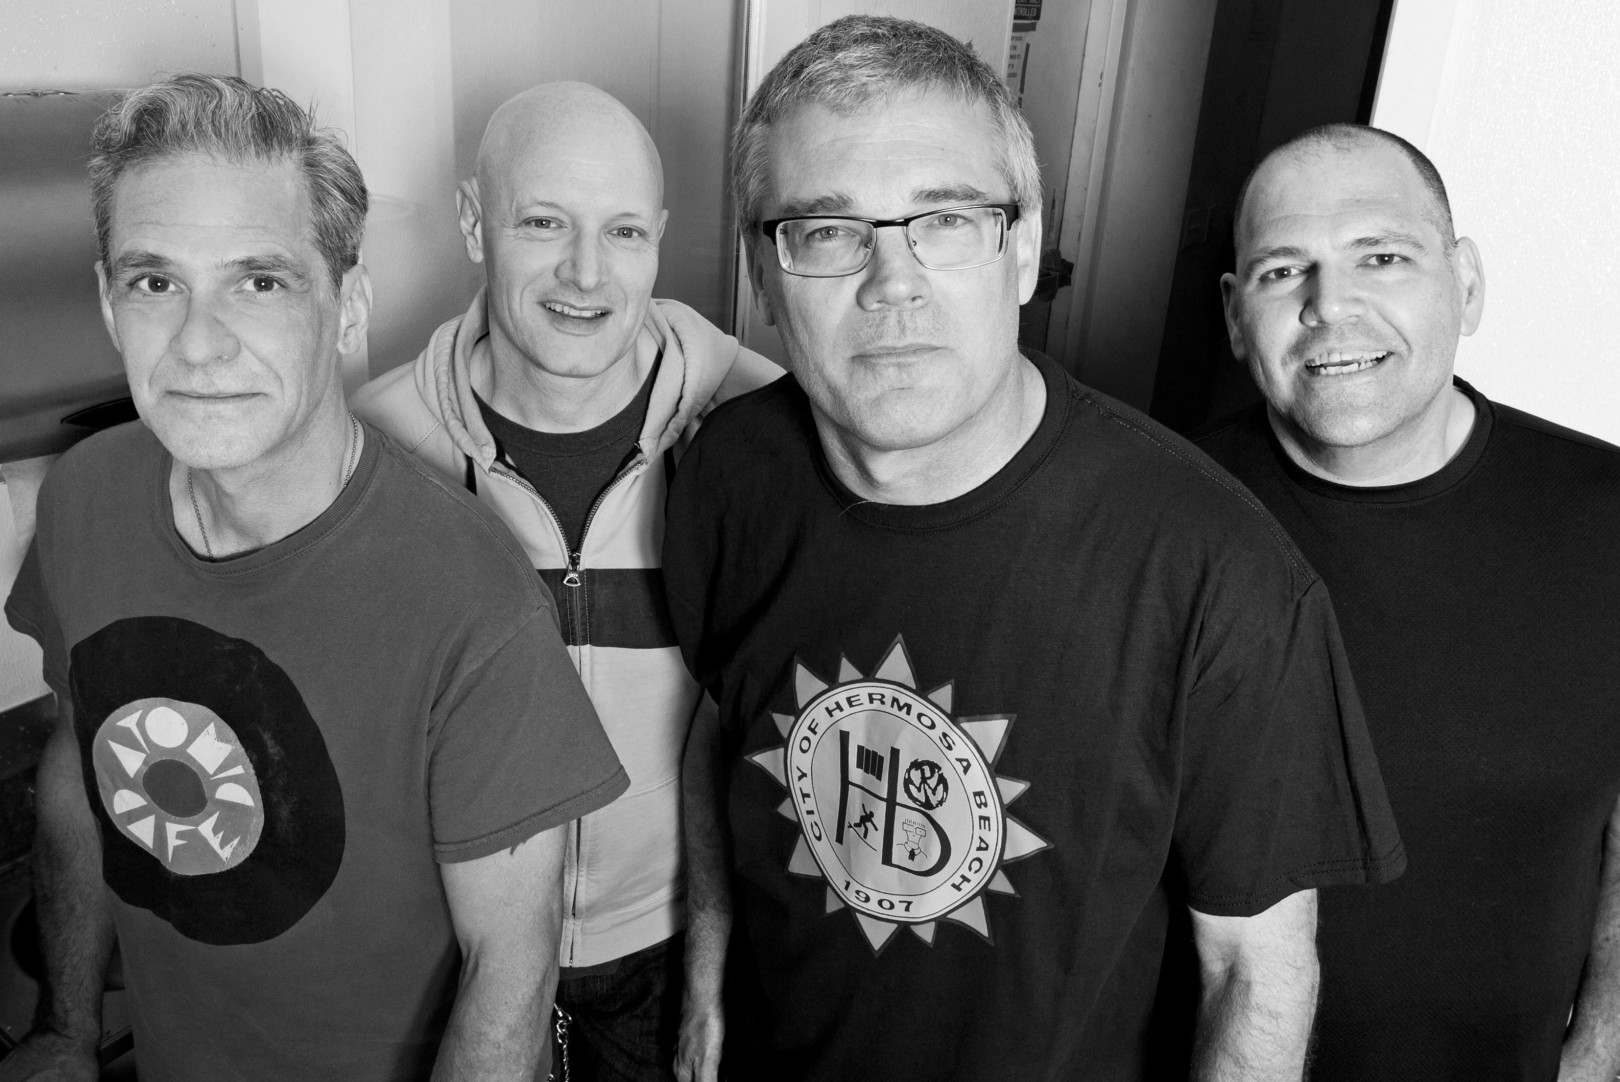 Descendents announce two UK shows